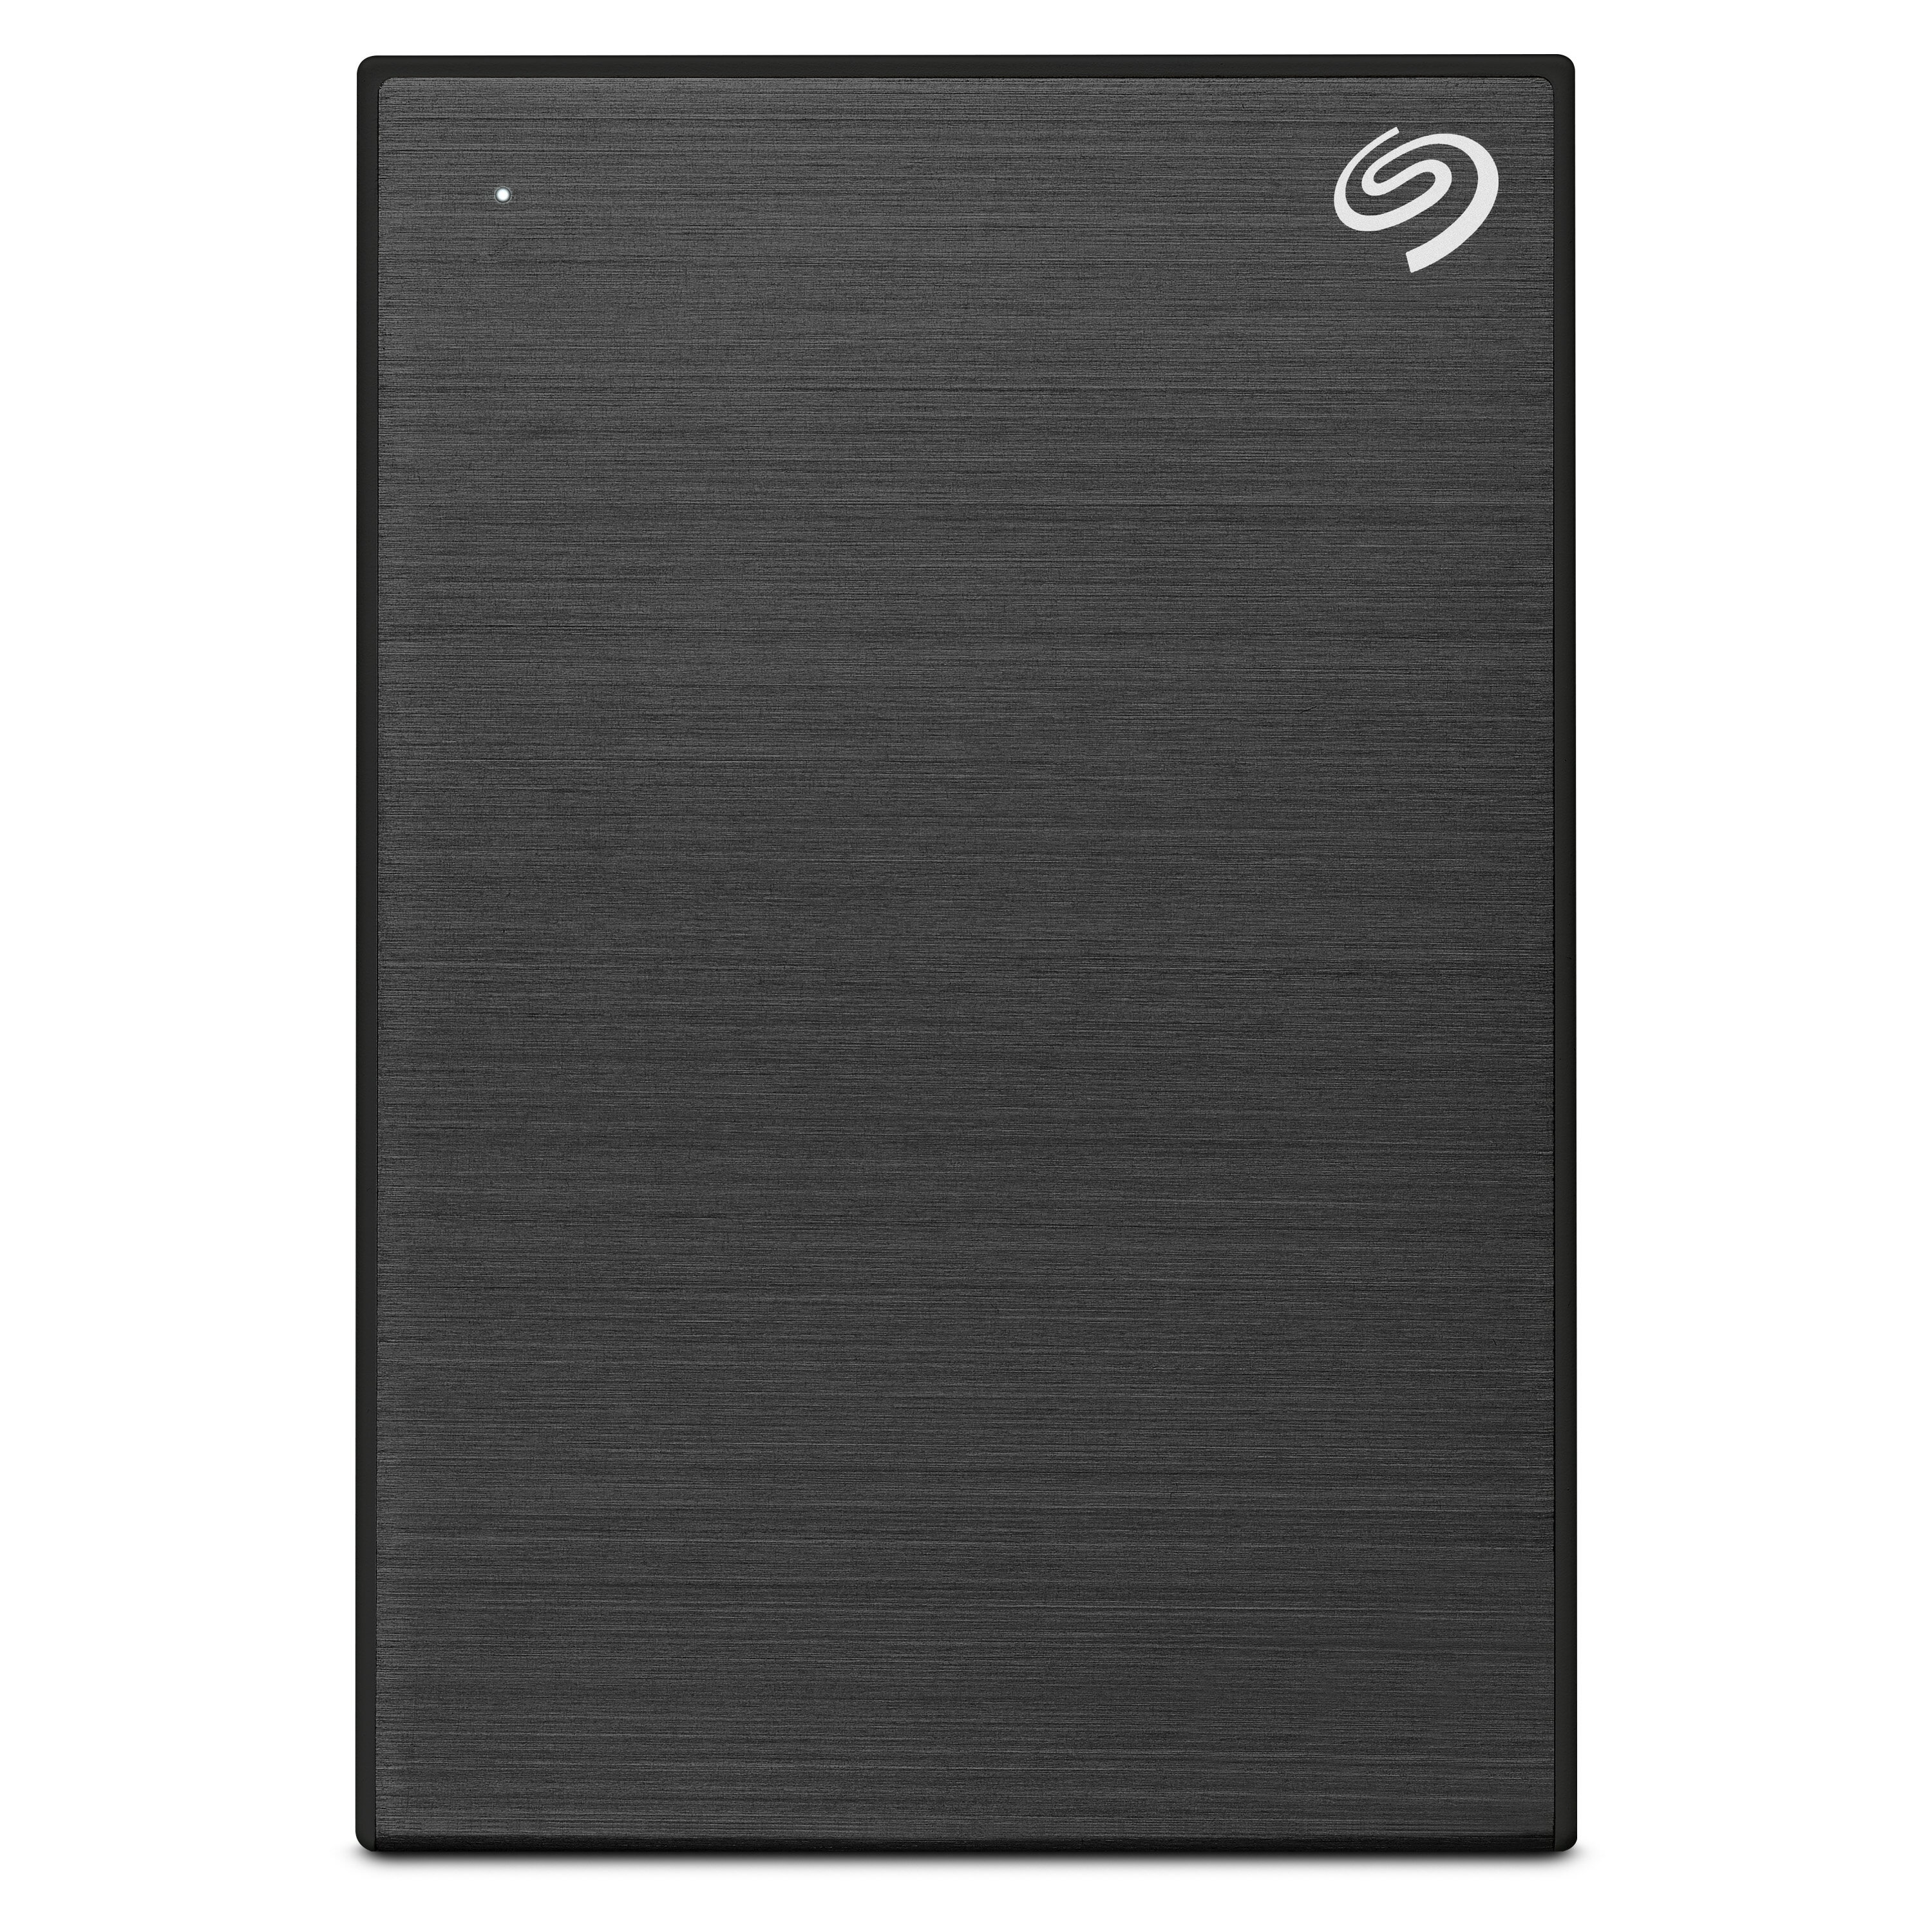 Seagate シーゲイト One Touch HDD パス